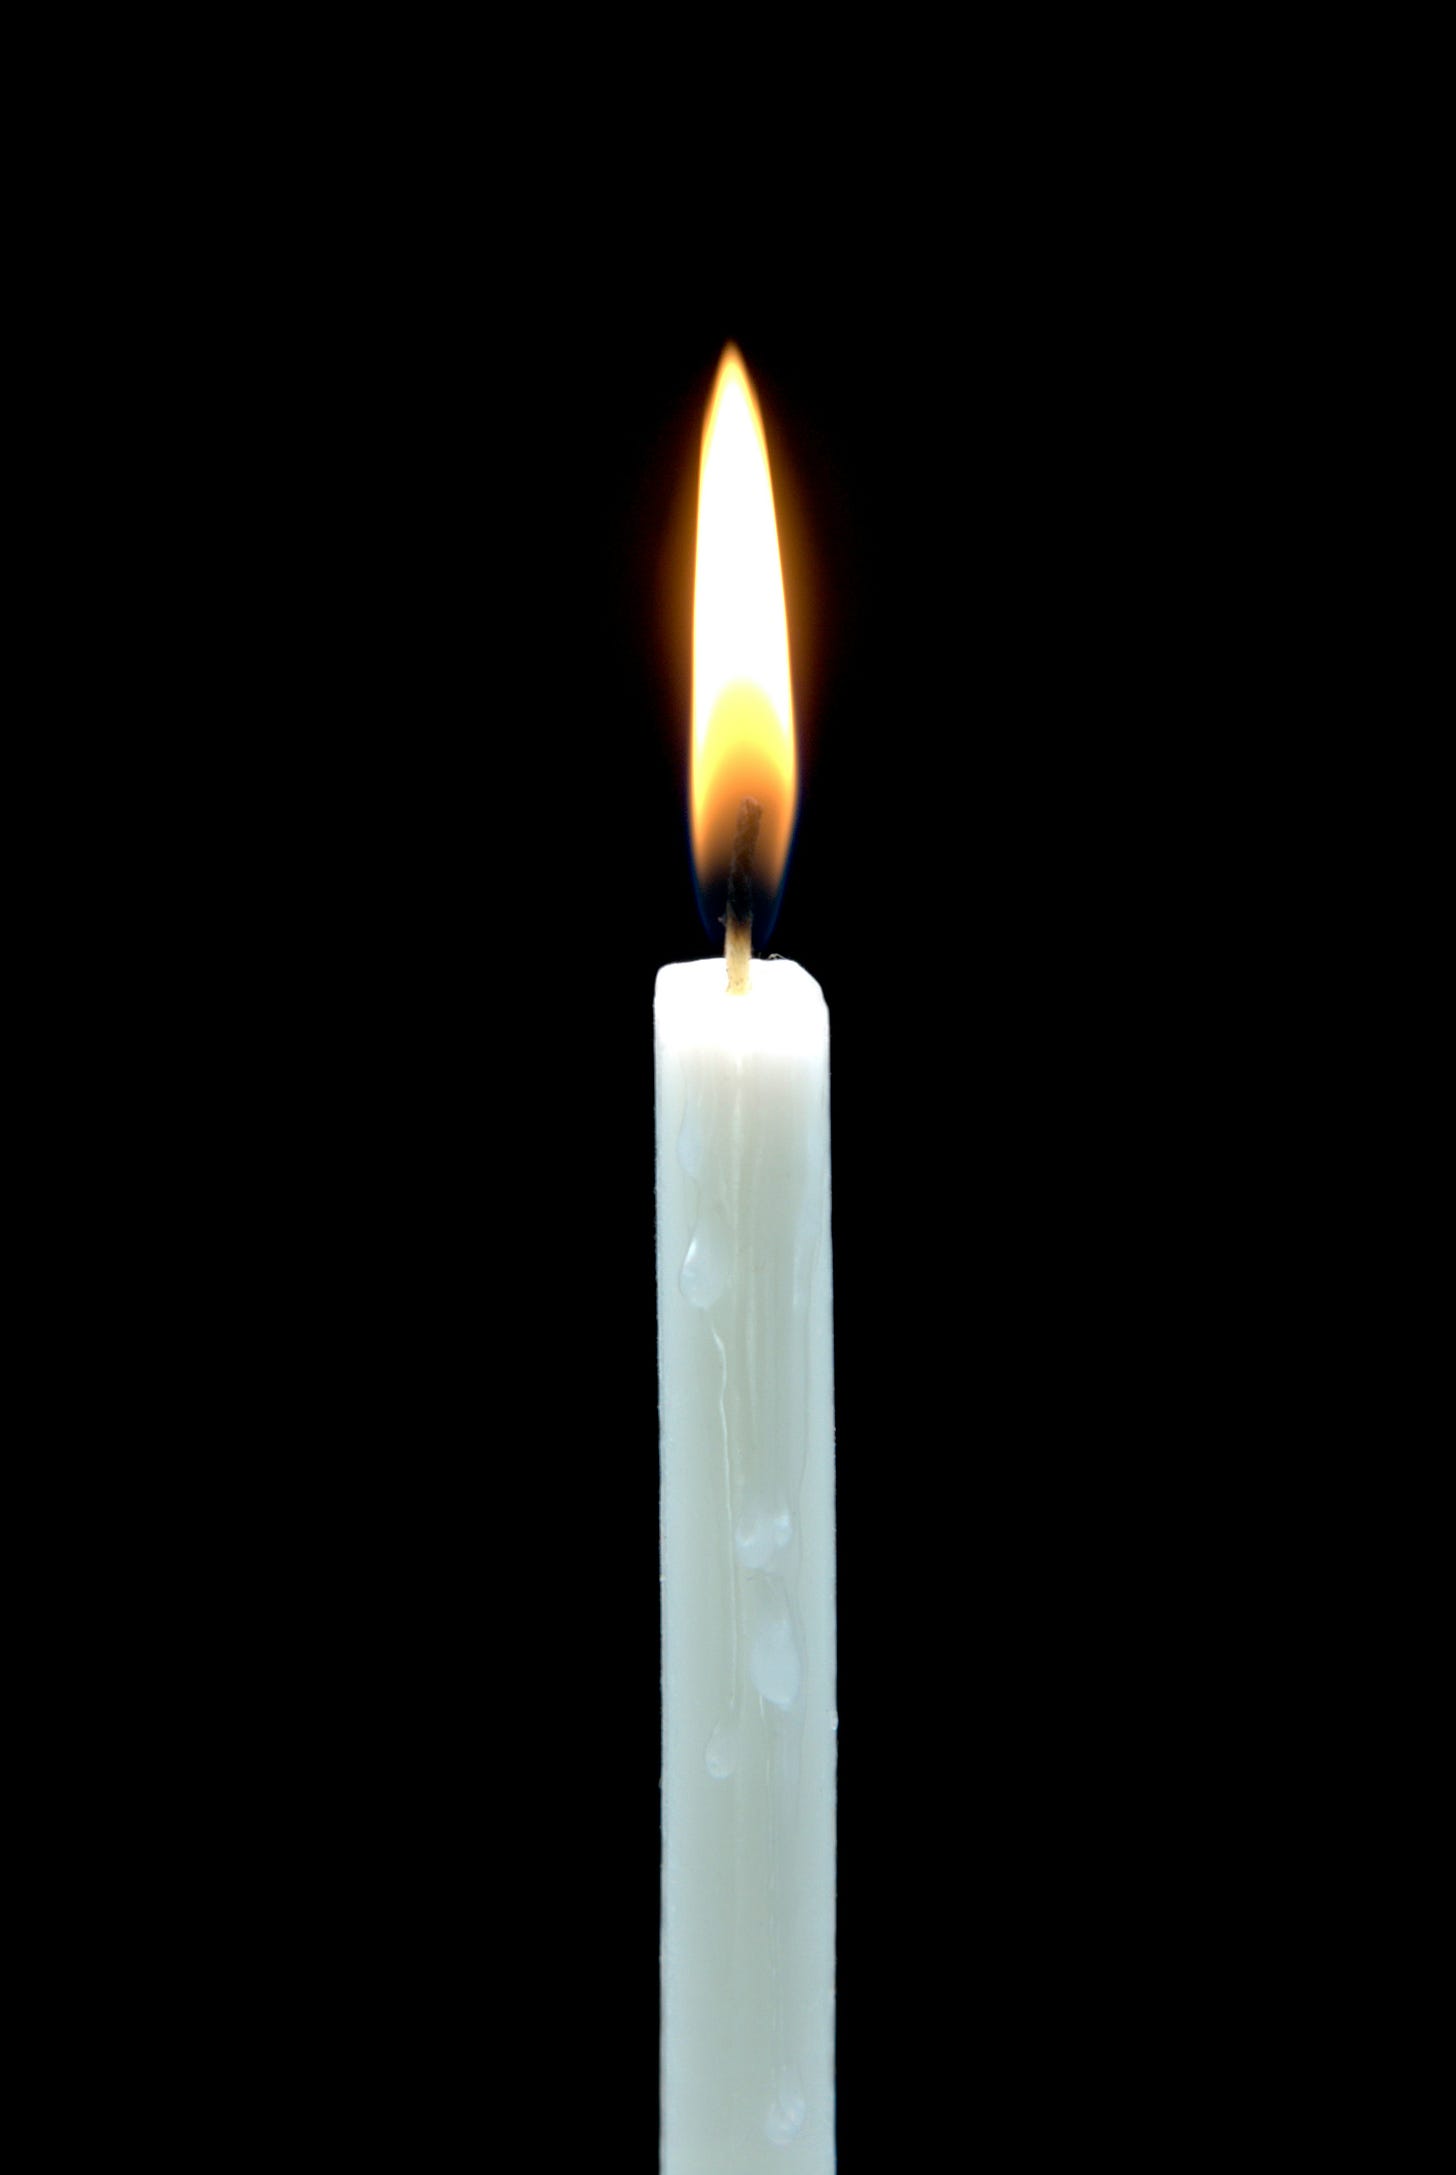 Lit white candle against a black background.